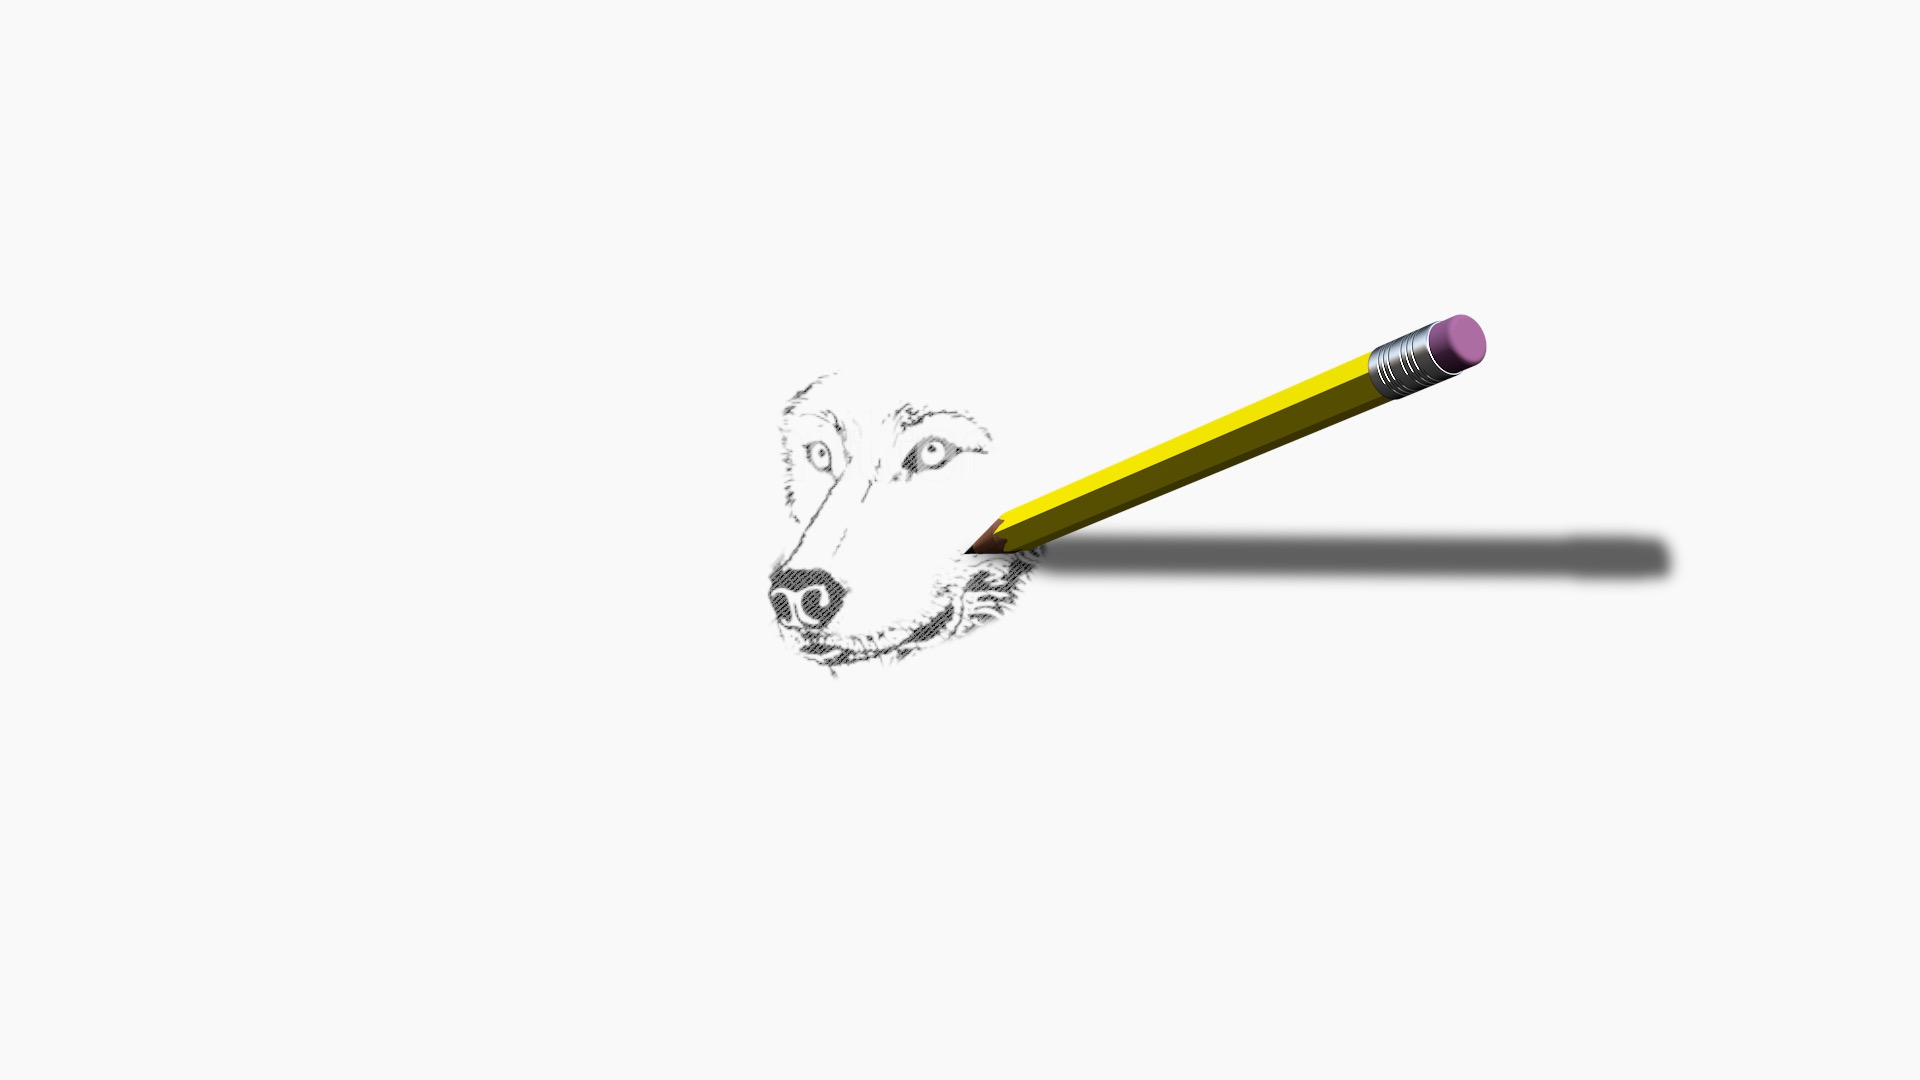 The Pencil 3D model generator for FCPX